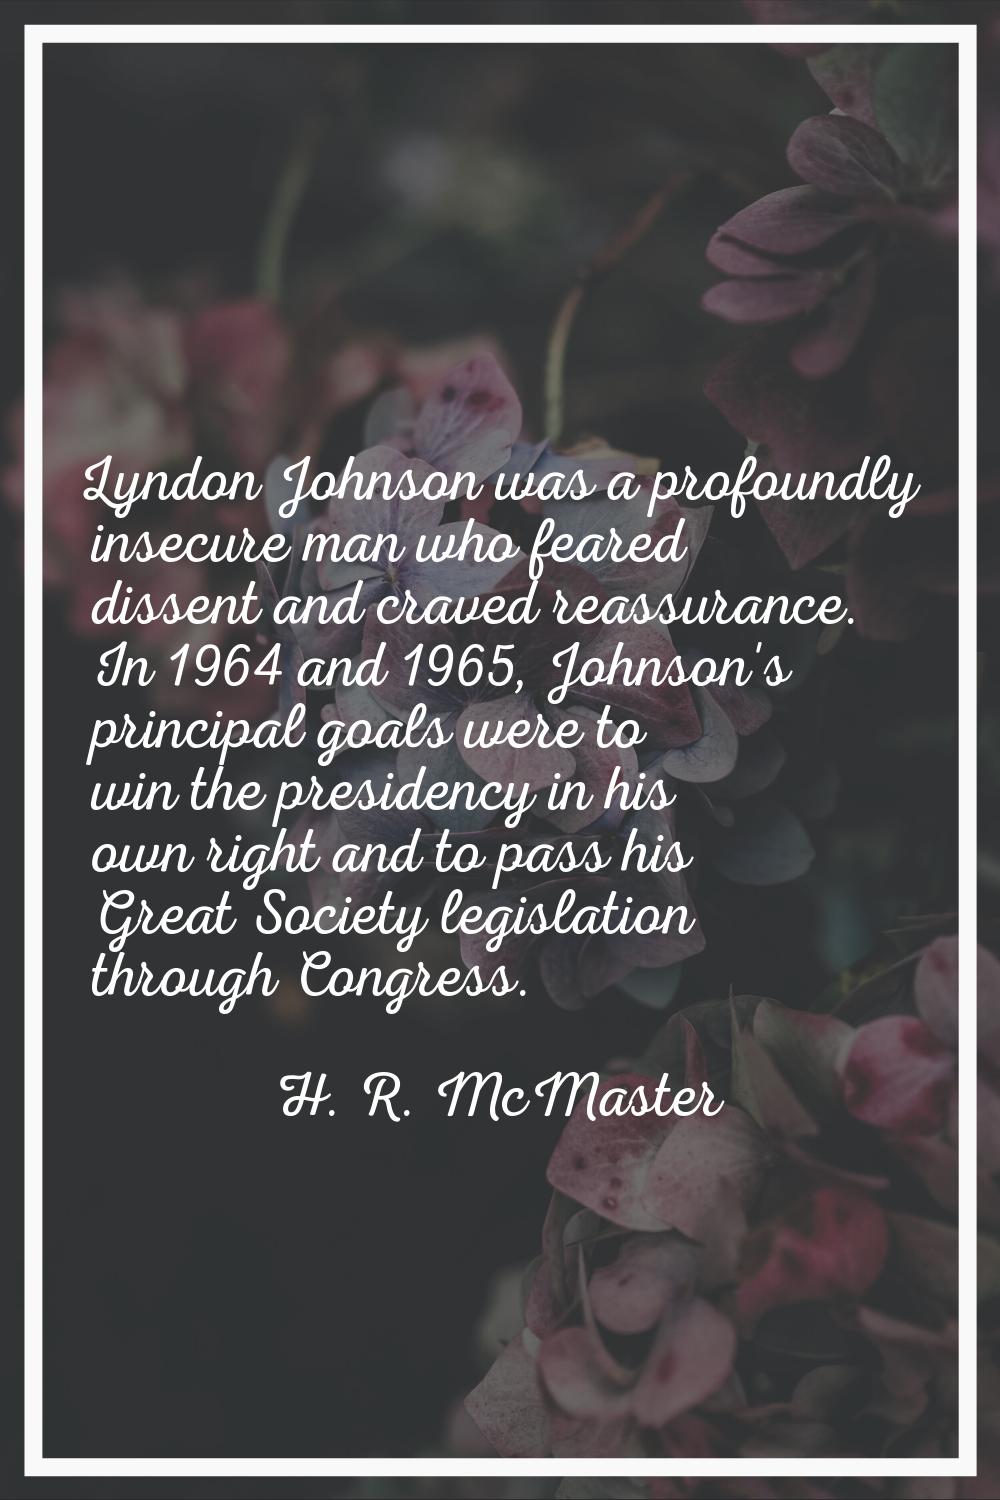 Lyndon Johnson was a profoundly insecure man who feared dissent and craved reassurance. In 1964 and